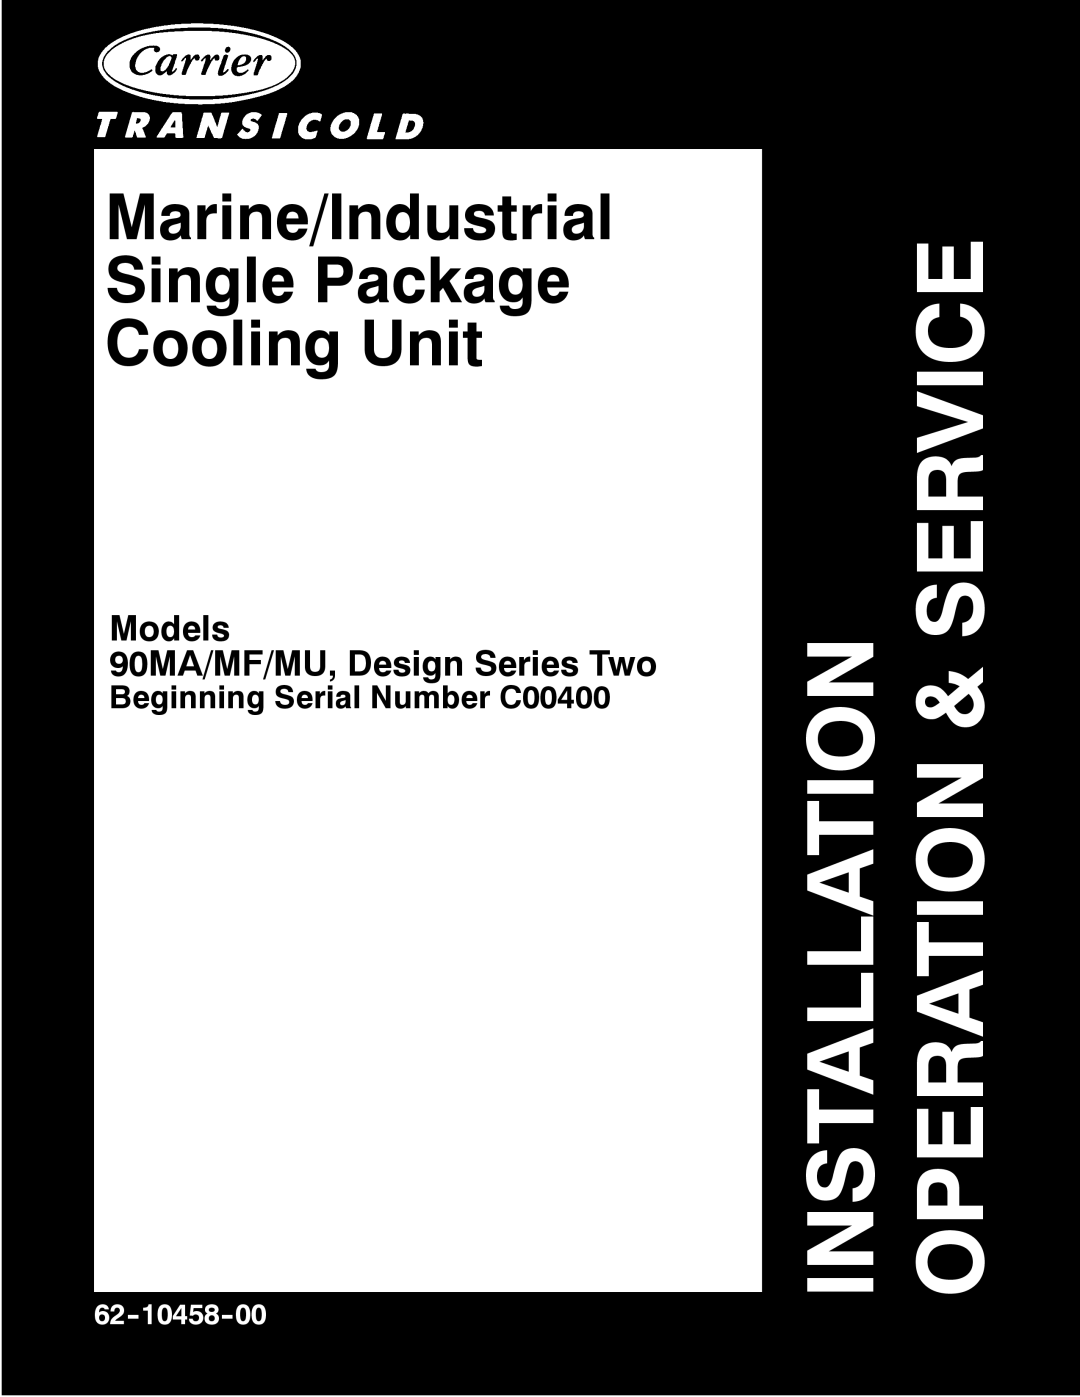 Carrier 90MA/MF/MU manual Installation Operation & Service, Marine/Industrial Single Package Cooling Unit, 62-10458-00 